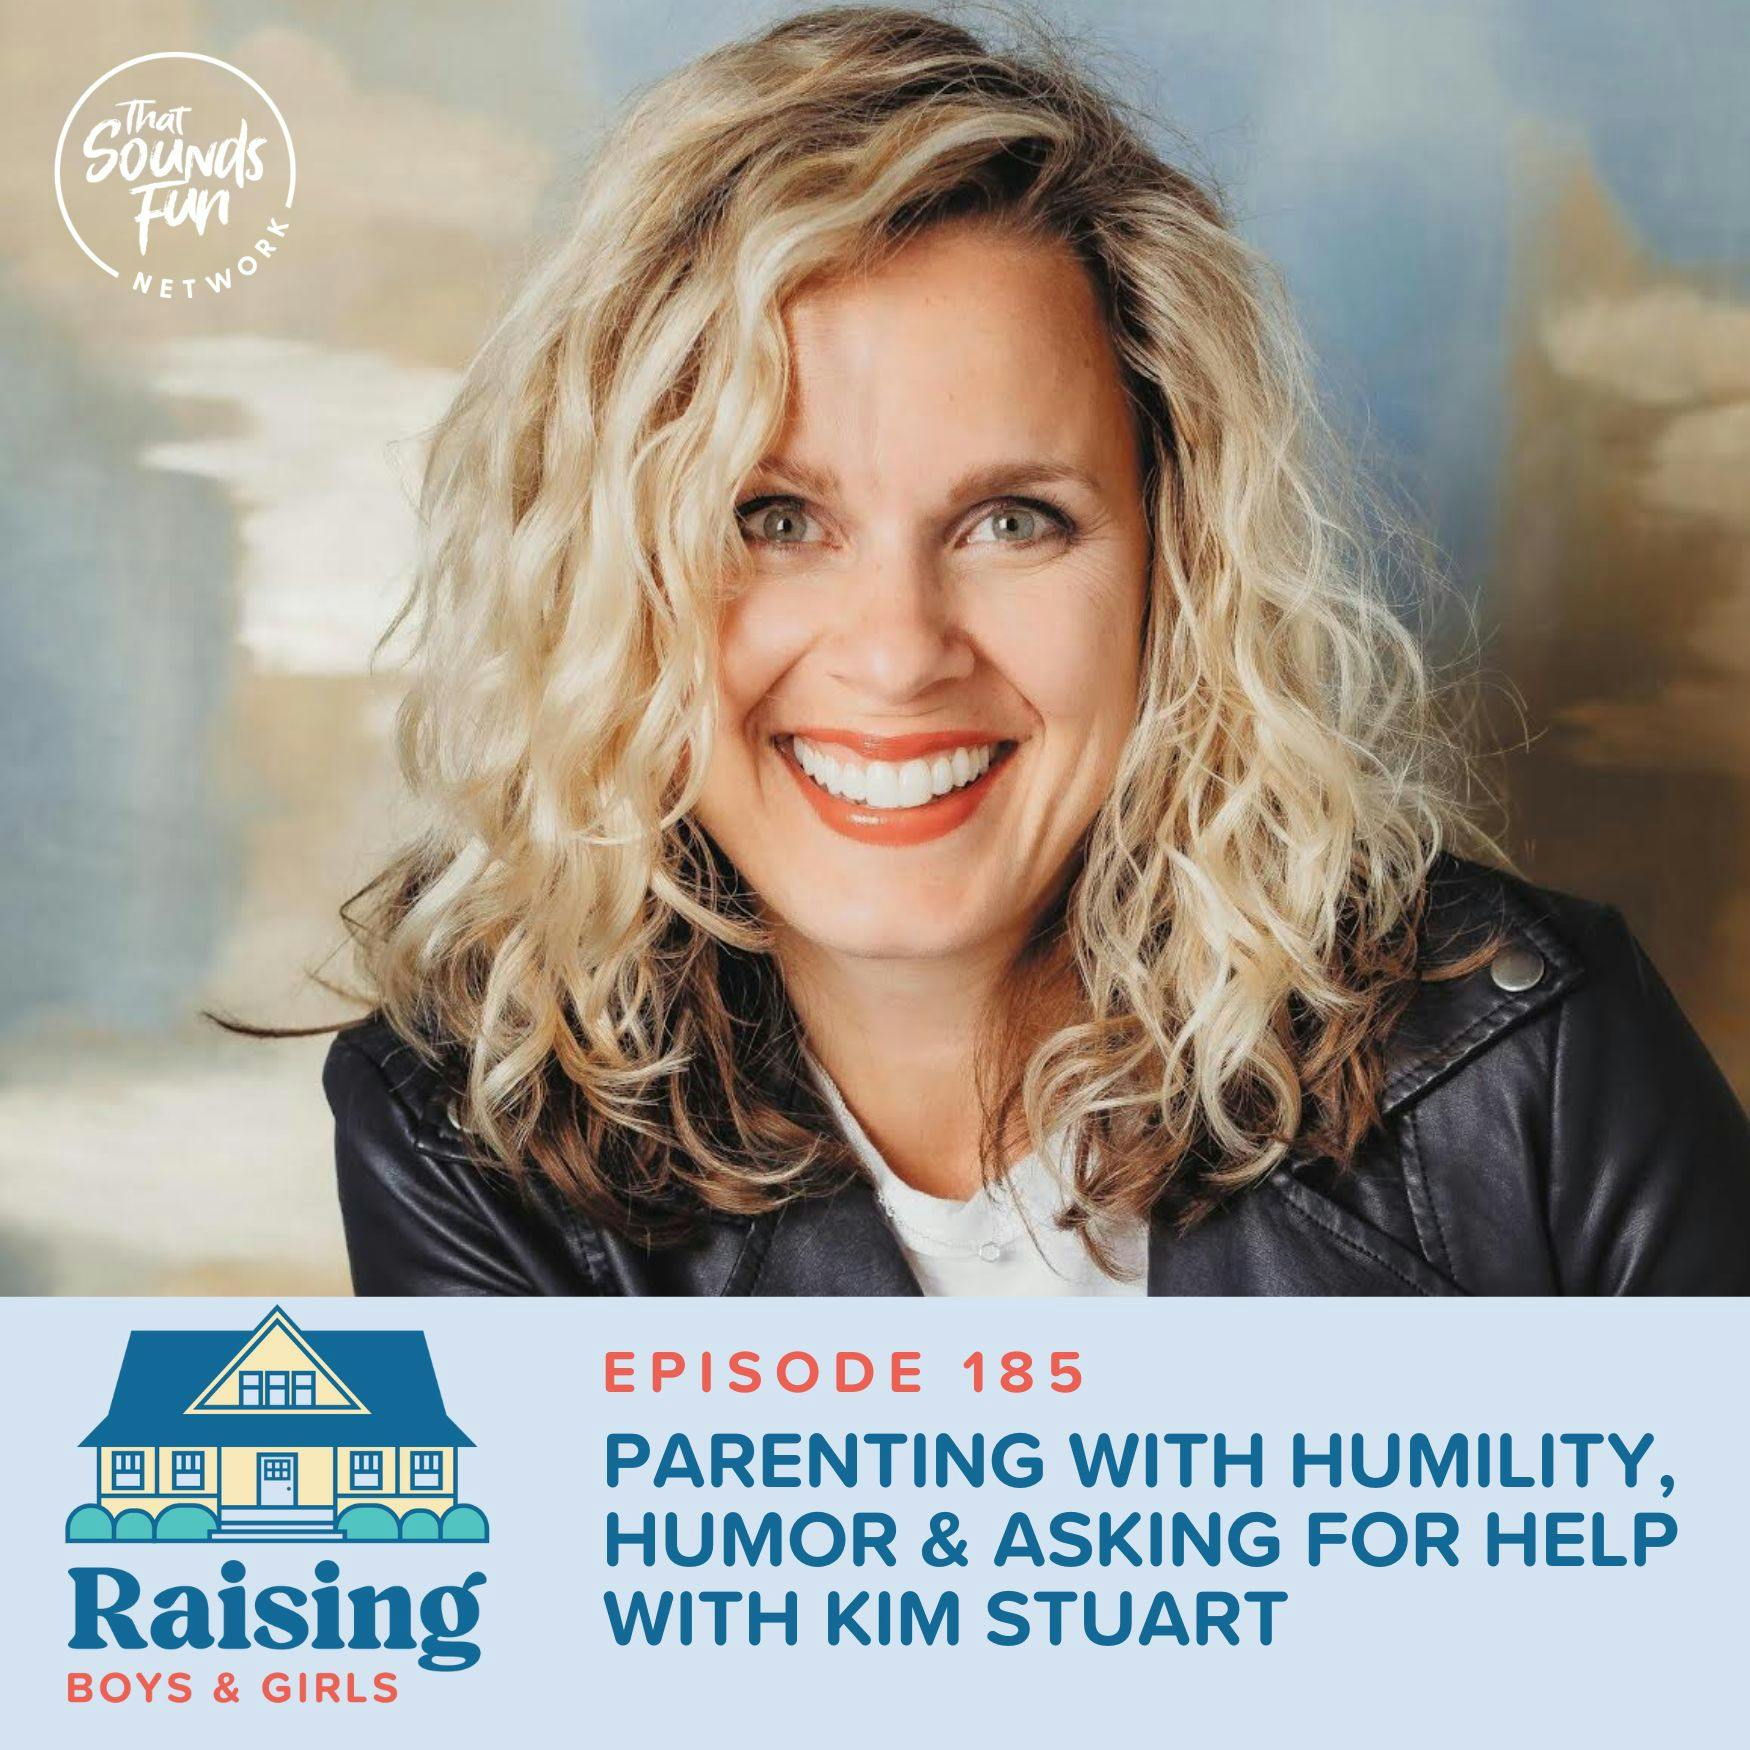 Episode 185: Parenting with Humility, Humor and Asking for Help with Kim Stuart